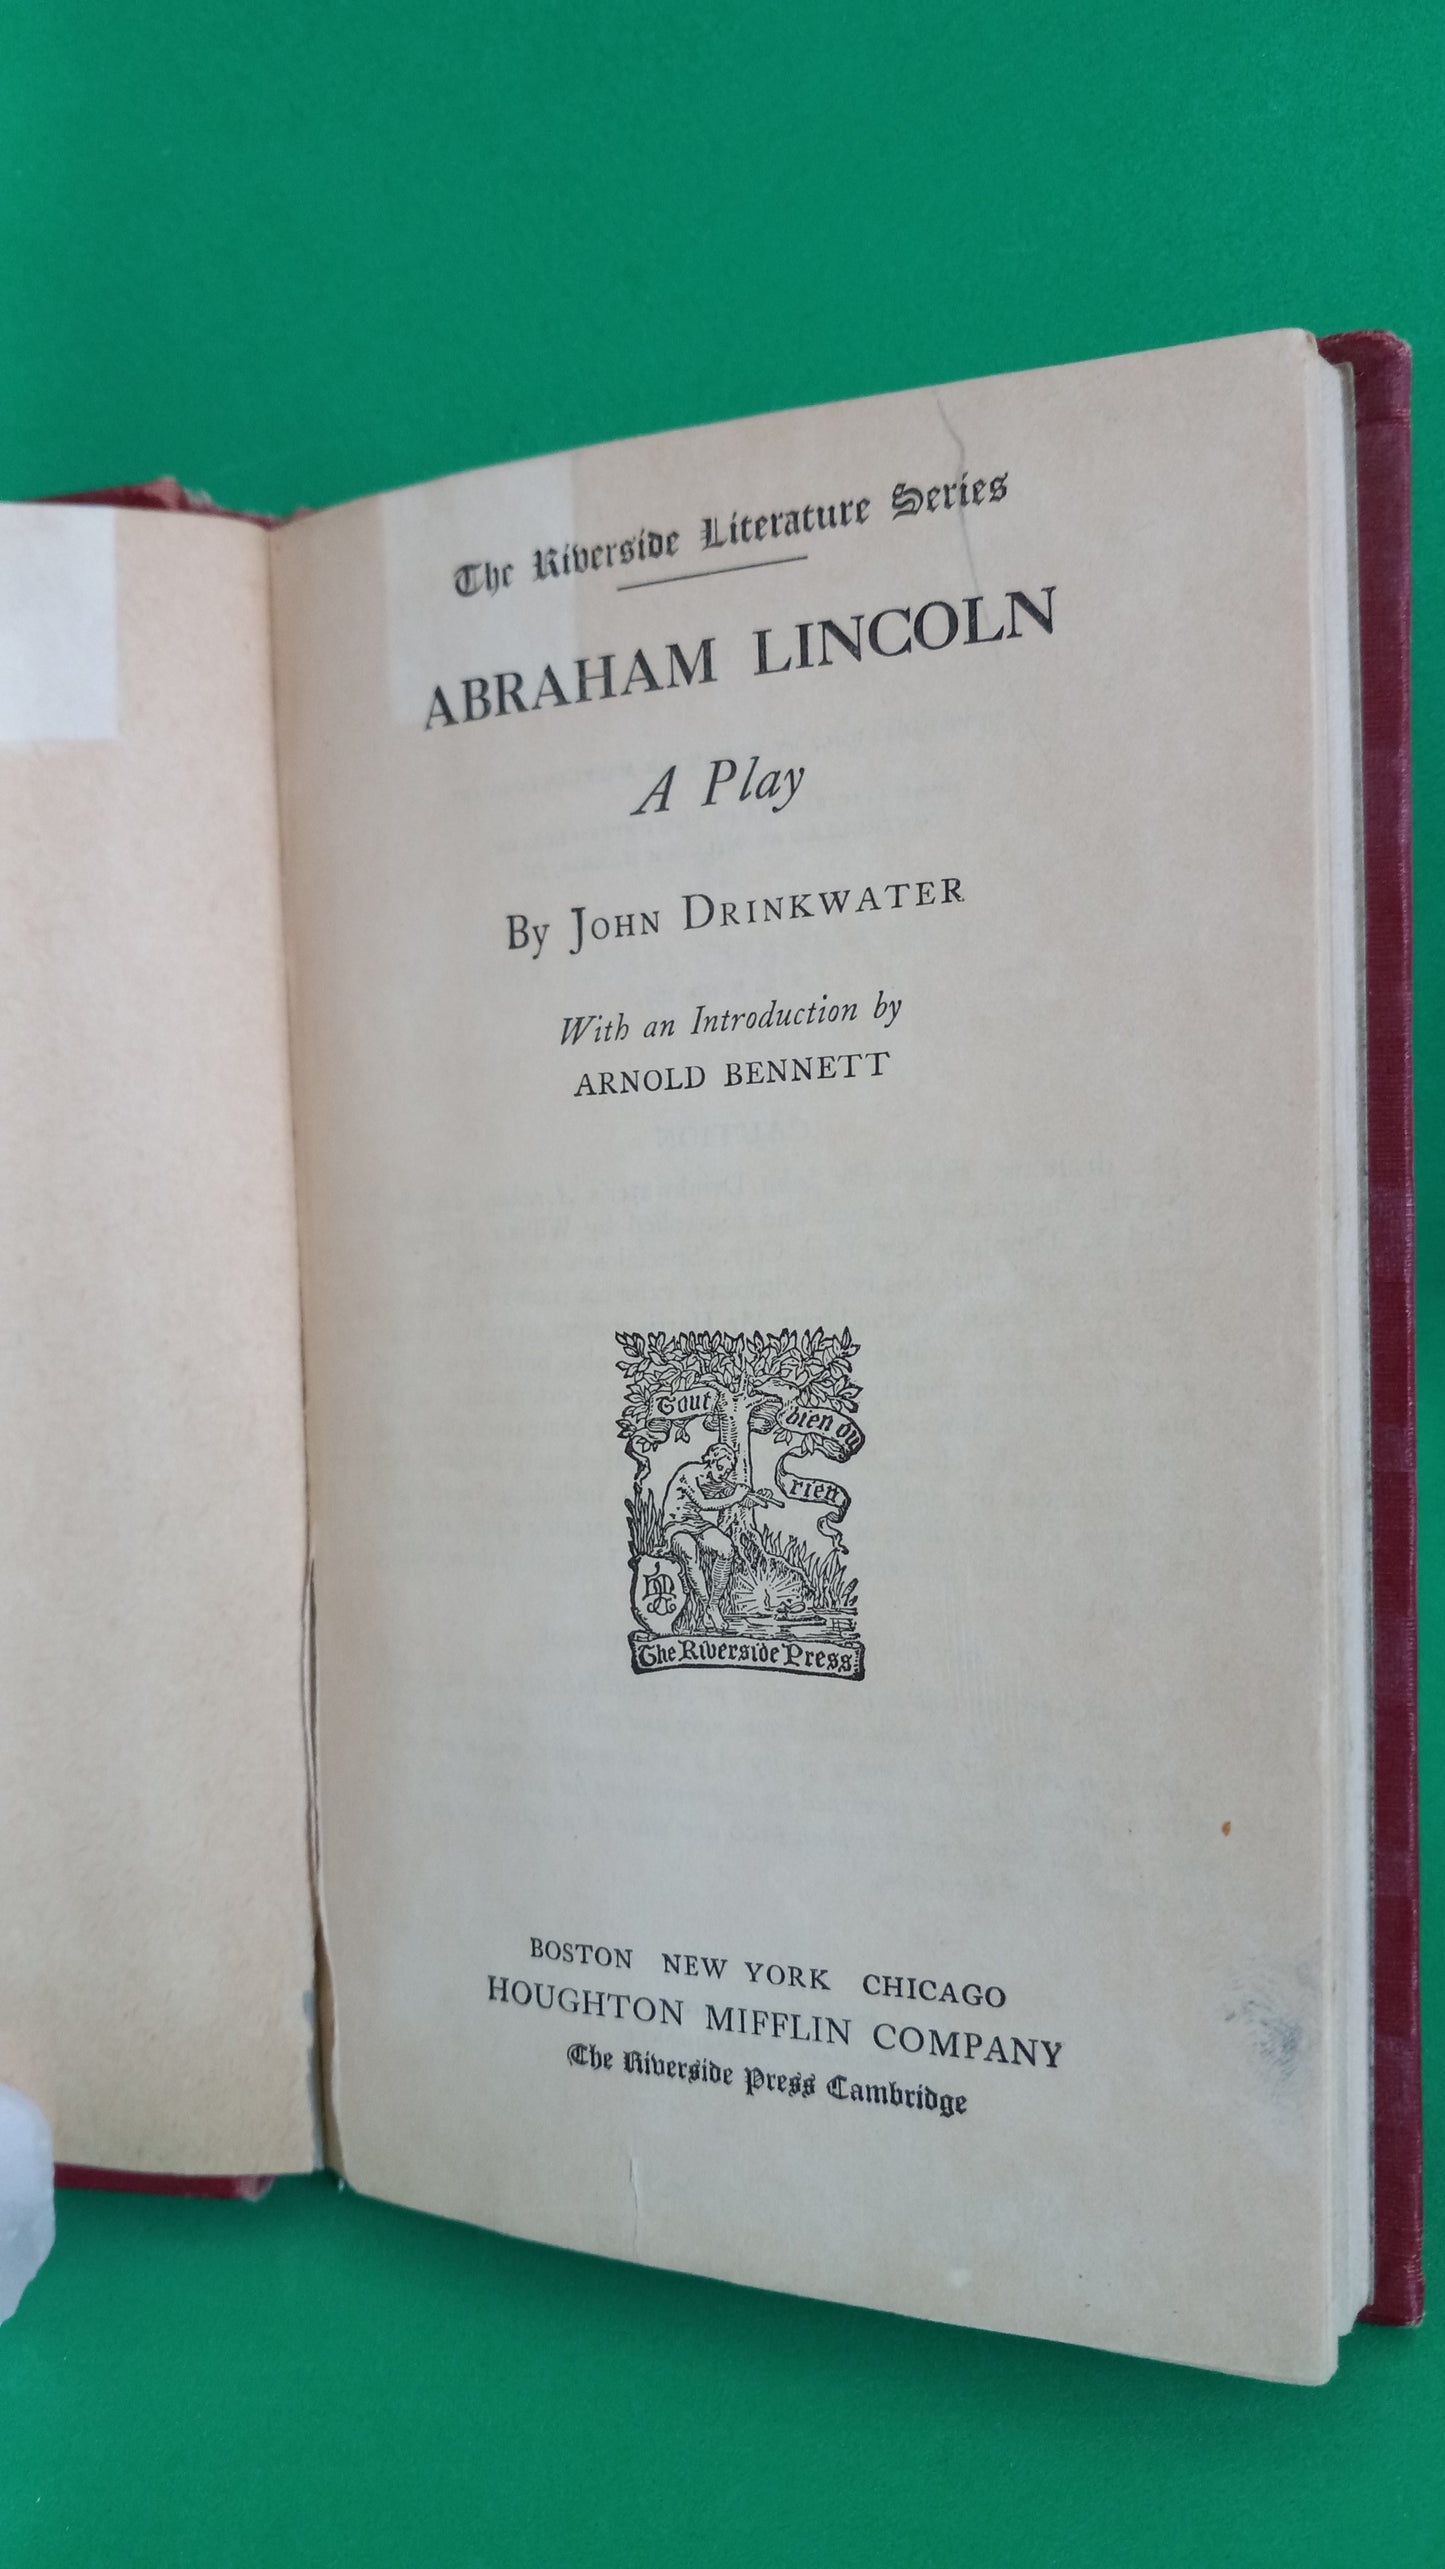 Abraham Lincoln, A Play